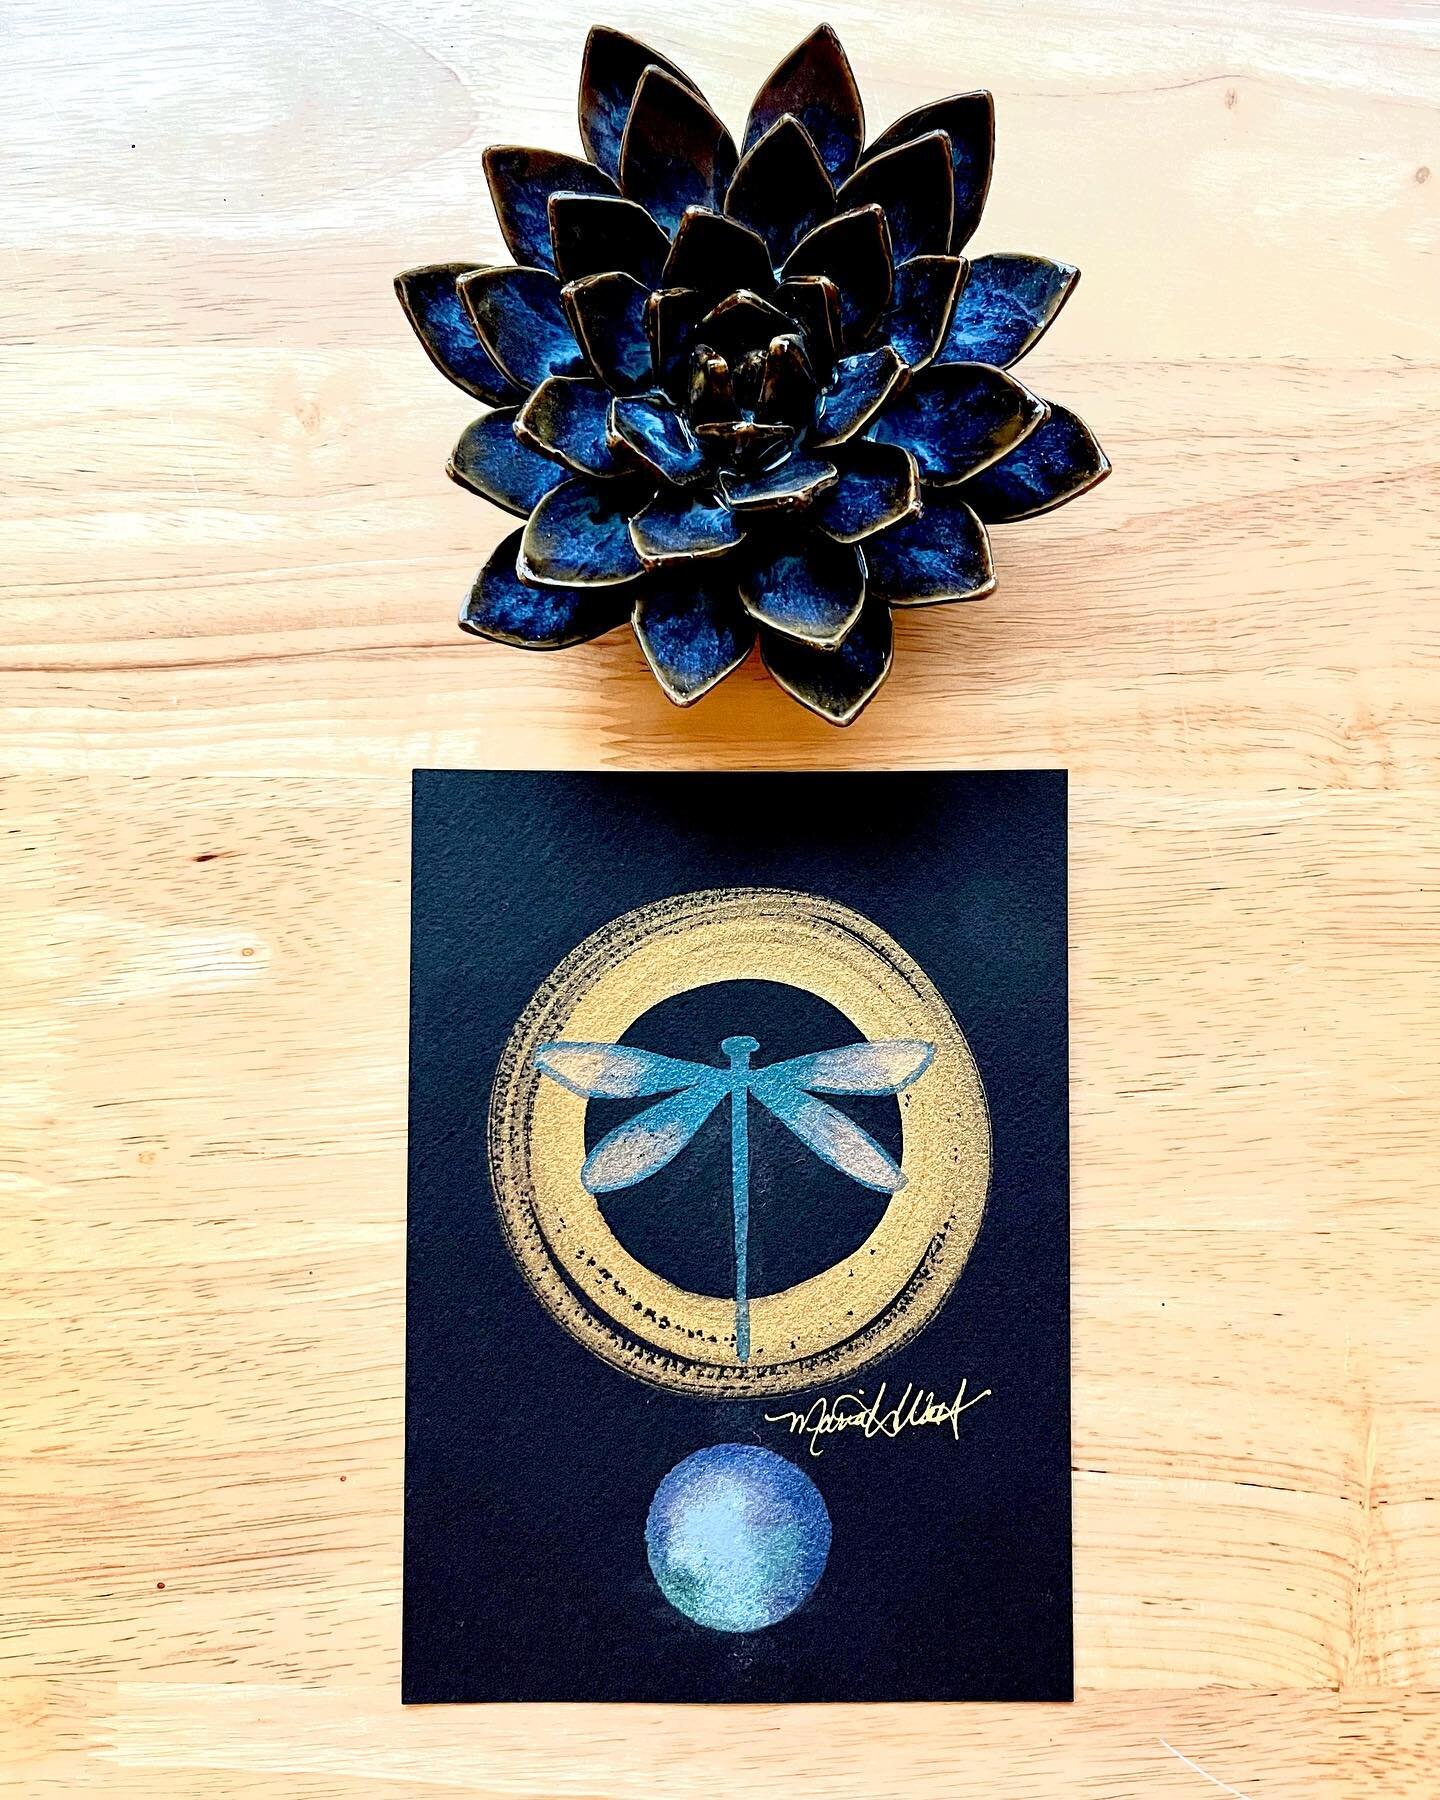 New art! 

Align. 

For those who are coming into alignment with their deepest truths. 

More photos in comments. 

Not listed on my website yet. 

$125 

5x7

Iuile handmade watercolors on black Legion watercolor paper. Shifting iridescent colors in